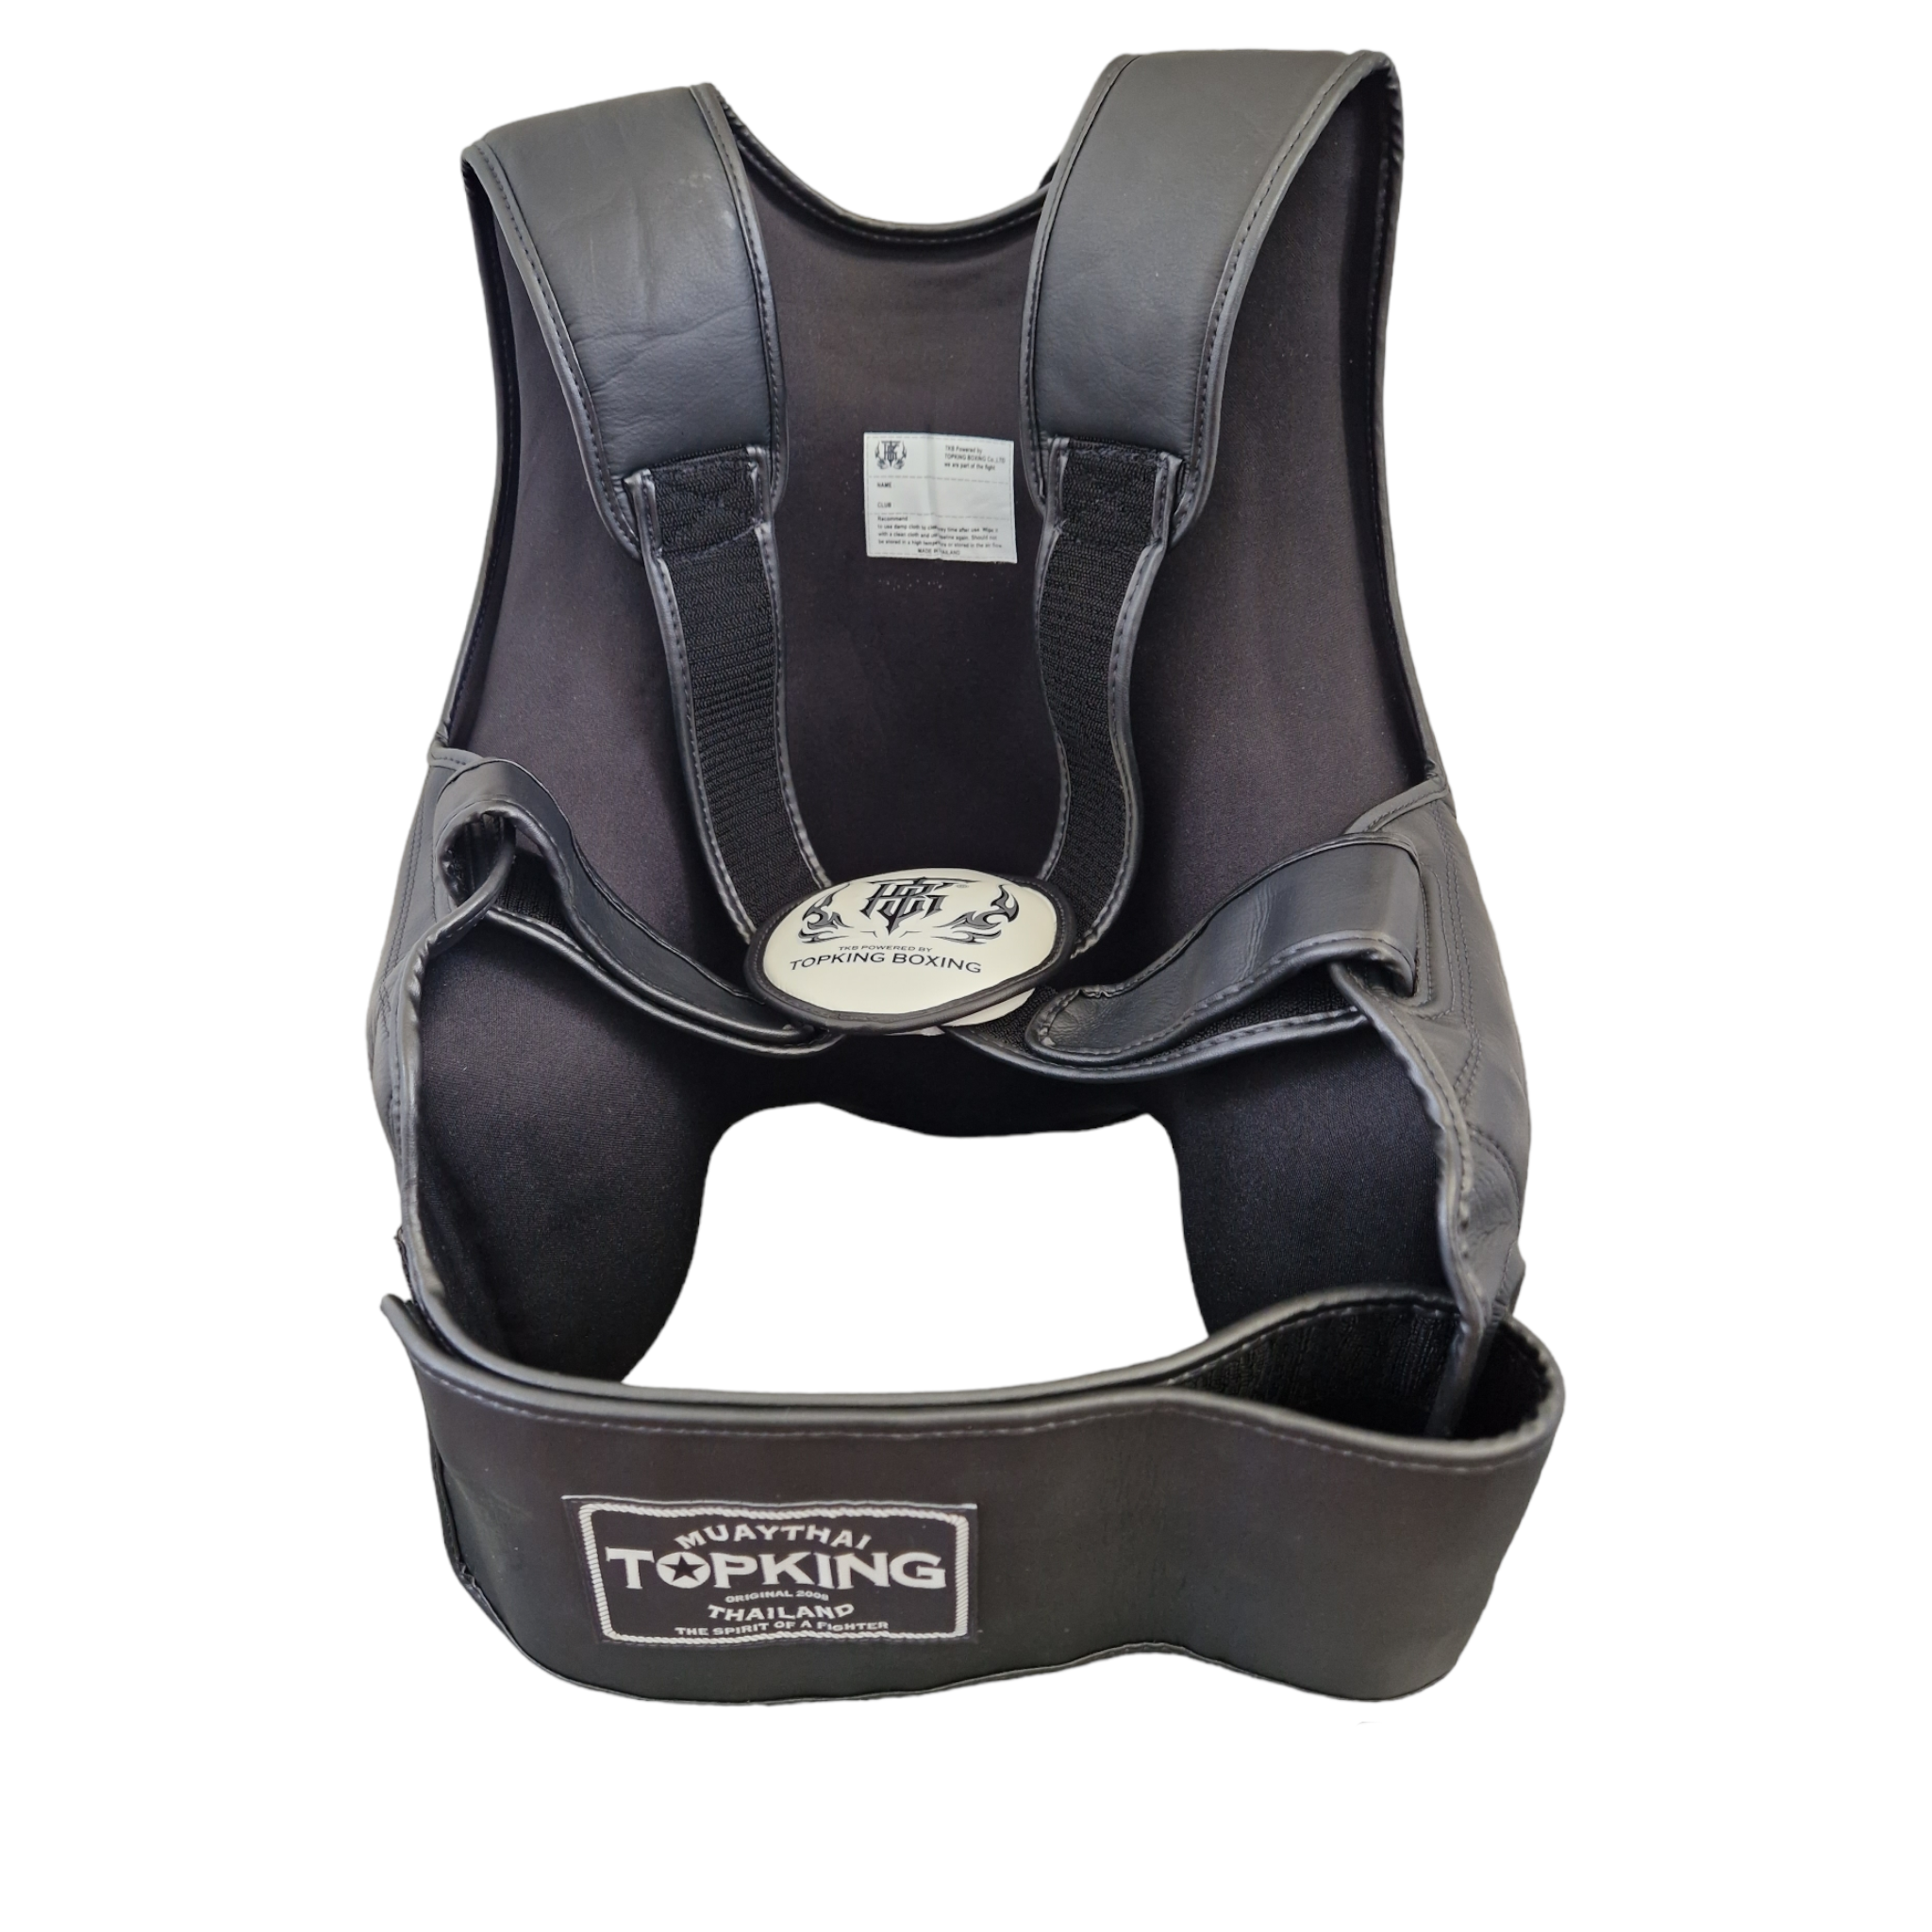 Top-King-Body-protector